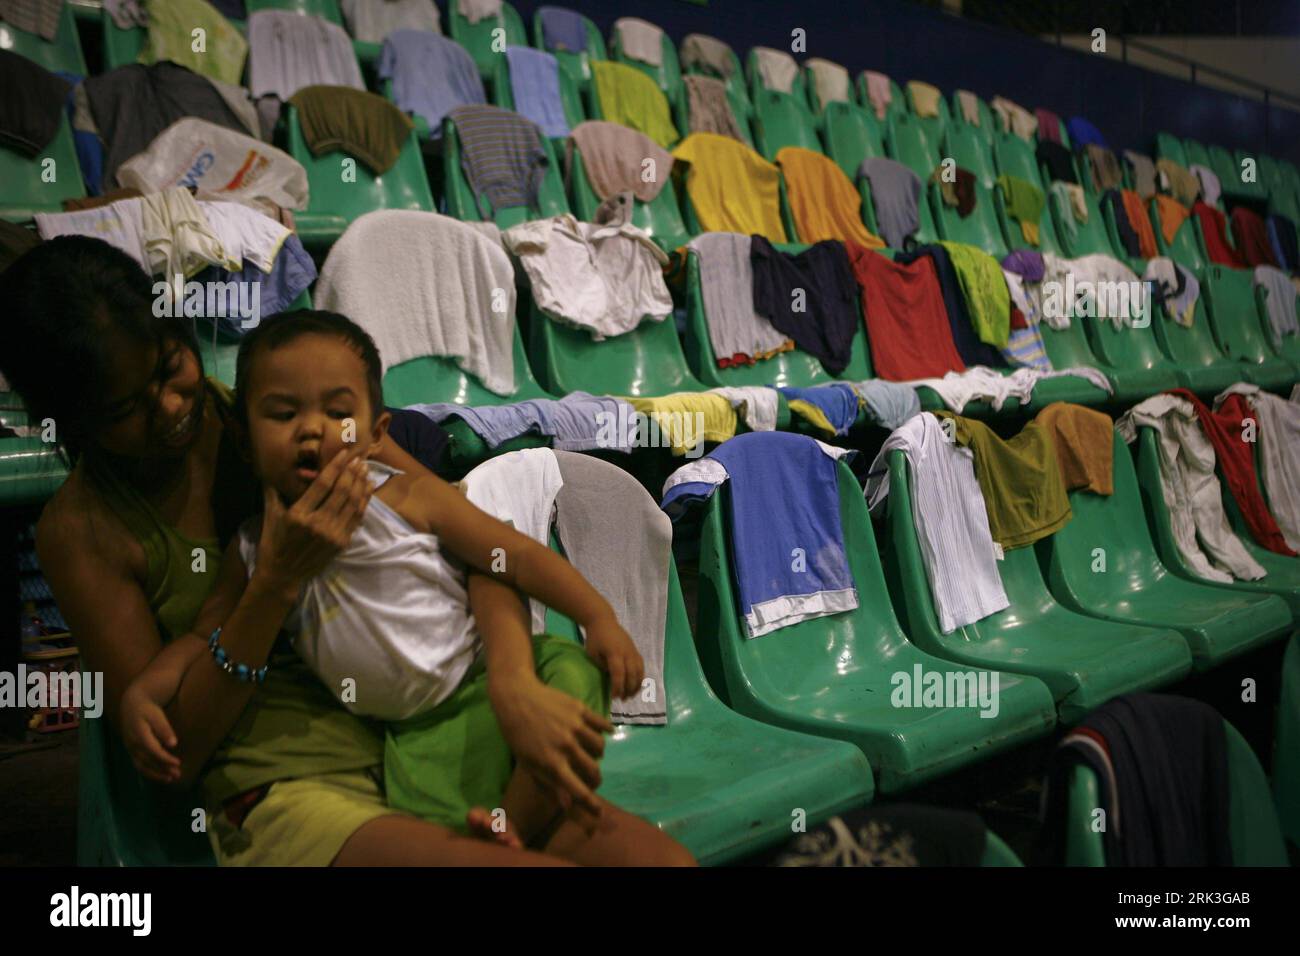 Bildnummer: 53506495  Datum: 05.10.2009  Copyright: imago/Xinhua (091005) -- MANILA, Oct. 5, 2009 (Xinhua) -- Filipino flood evacuees clothes are hung up to be aired at a sports complex of a school used as evacuation center in Pasig City, east of Manila, capital of the Philippines, on Oct. 5, 2009. Over 3 millionare still struggling to recover from floods brought on by Typhoon Ketsana that hit Metro Manila and surrounding provinces in recent days, while at least 17were killed when typhoon Parma pummelled the north-eastern Philippines since Oct. 3. (Xinhua/Luis Liwanag) (lr) (1)THE PHILIPPINES- Stock Photo